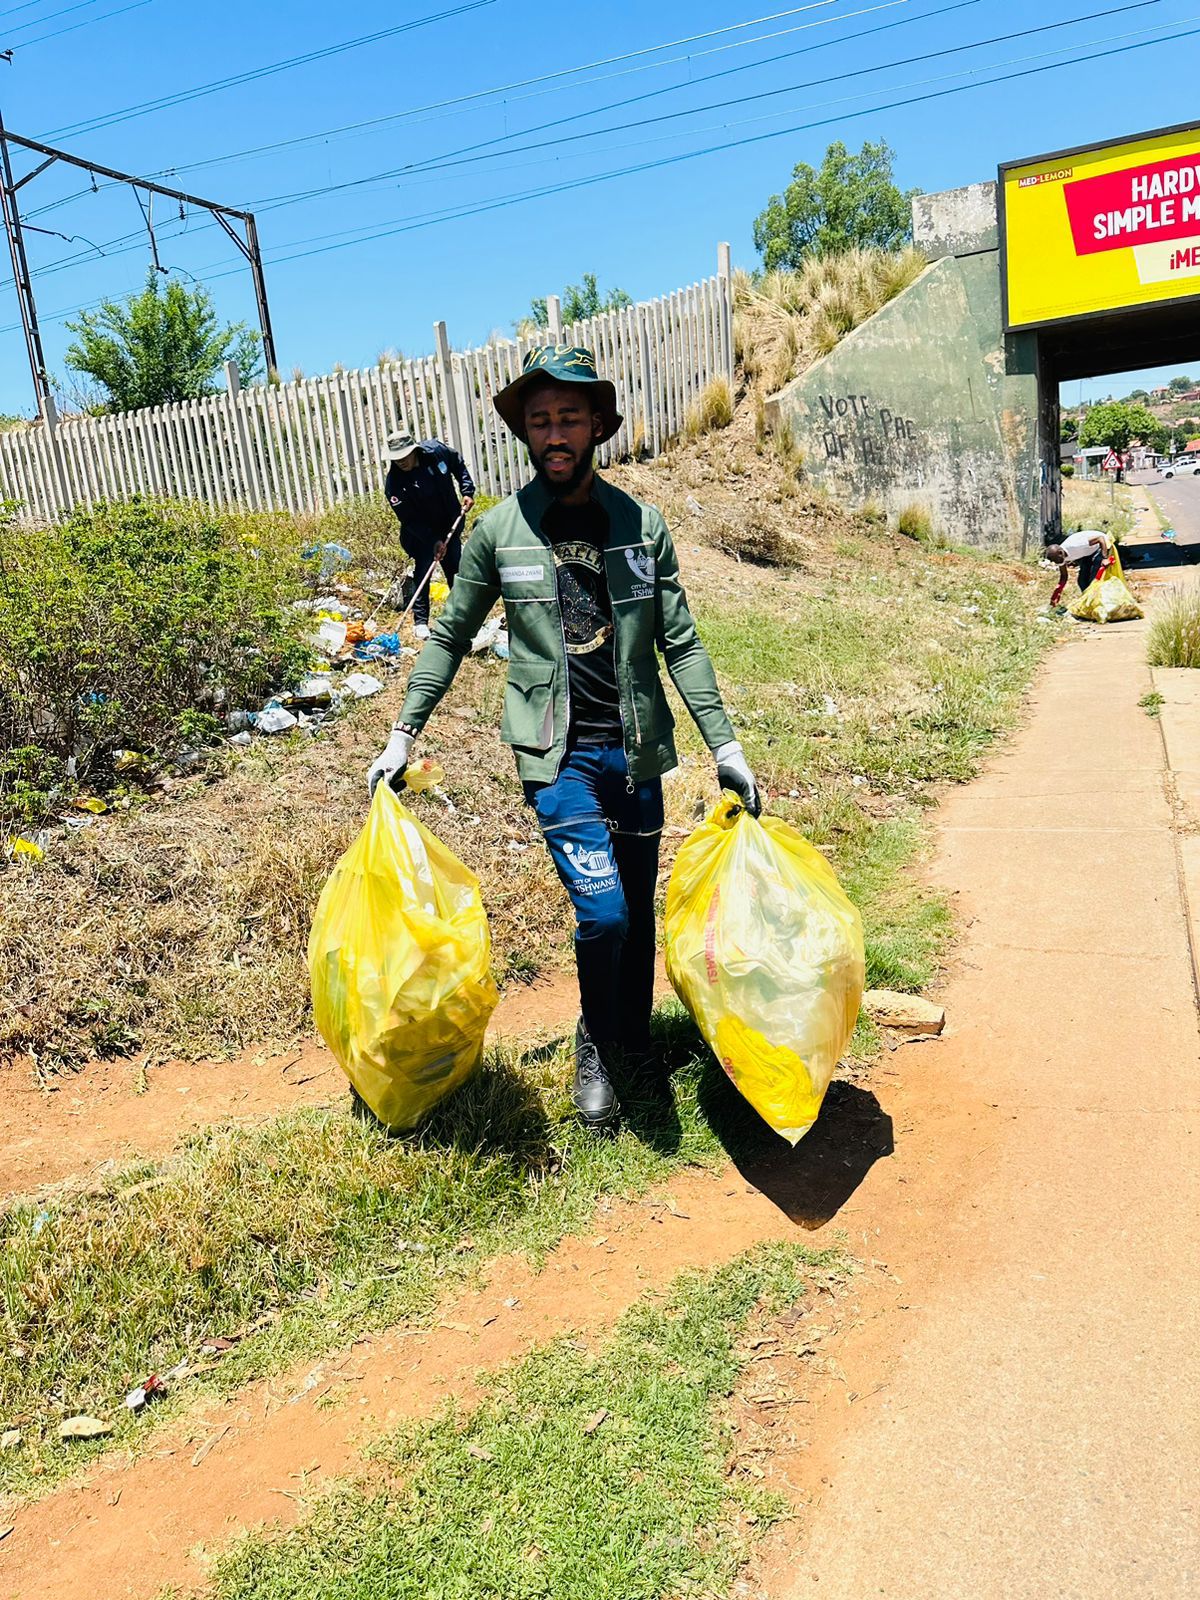 Getting his hands dirty City of Tshwane MMC for Environment and Agriculture Management Ziyanda Zwane put on overall and went to the street of Atteridgville in Tshwane 